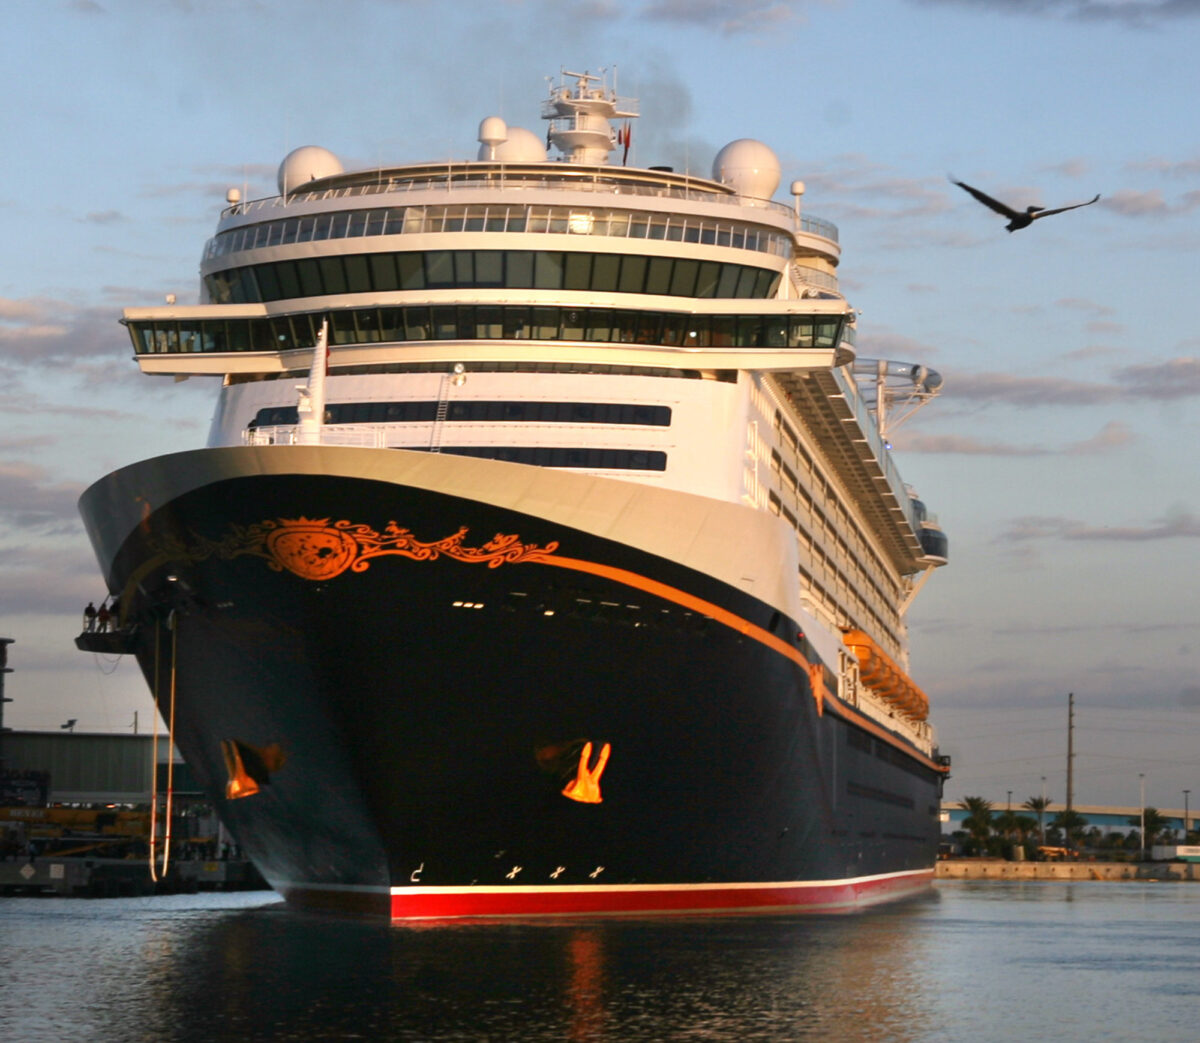 The Disney cruise ship Fantasy arrives at Port Canaveral, Florida, on March 7, 2012. Disney Fantasy was busy in 2020, and starting next year, Disney ships will dock in Port Everglades as well. (Joe Burbank/Orlando Sentinel/TNS)